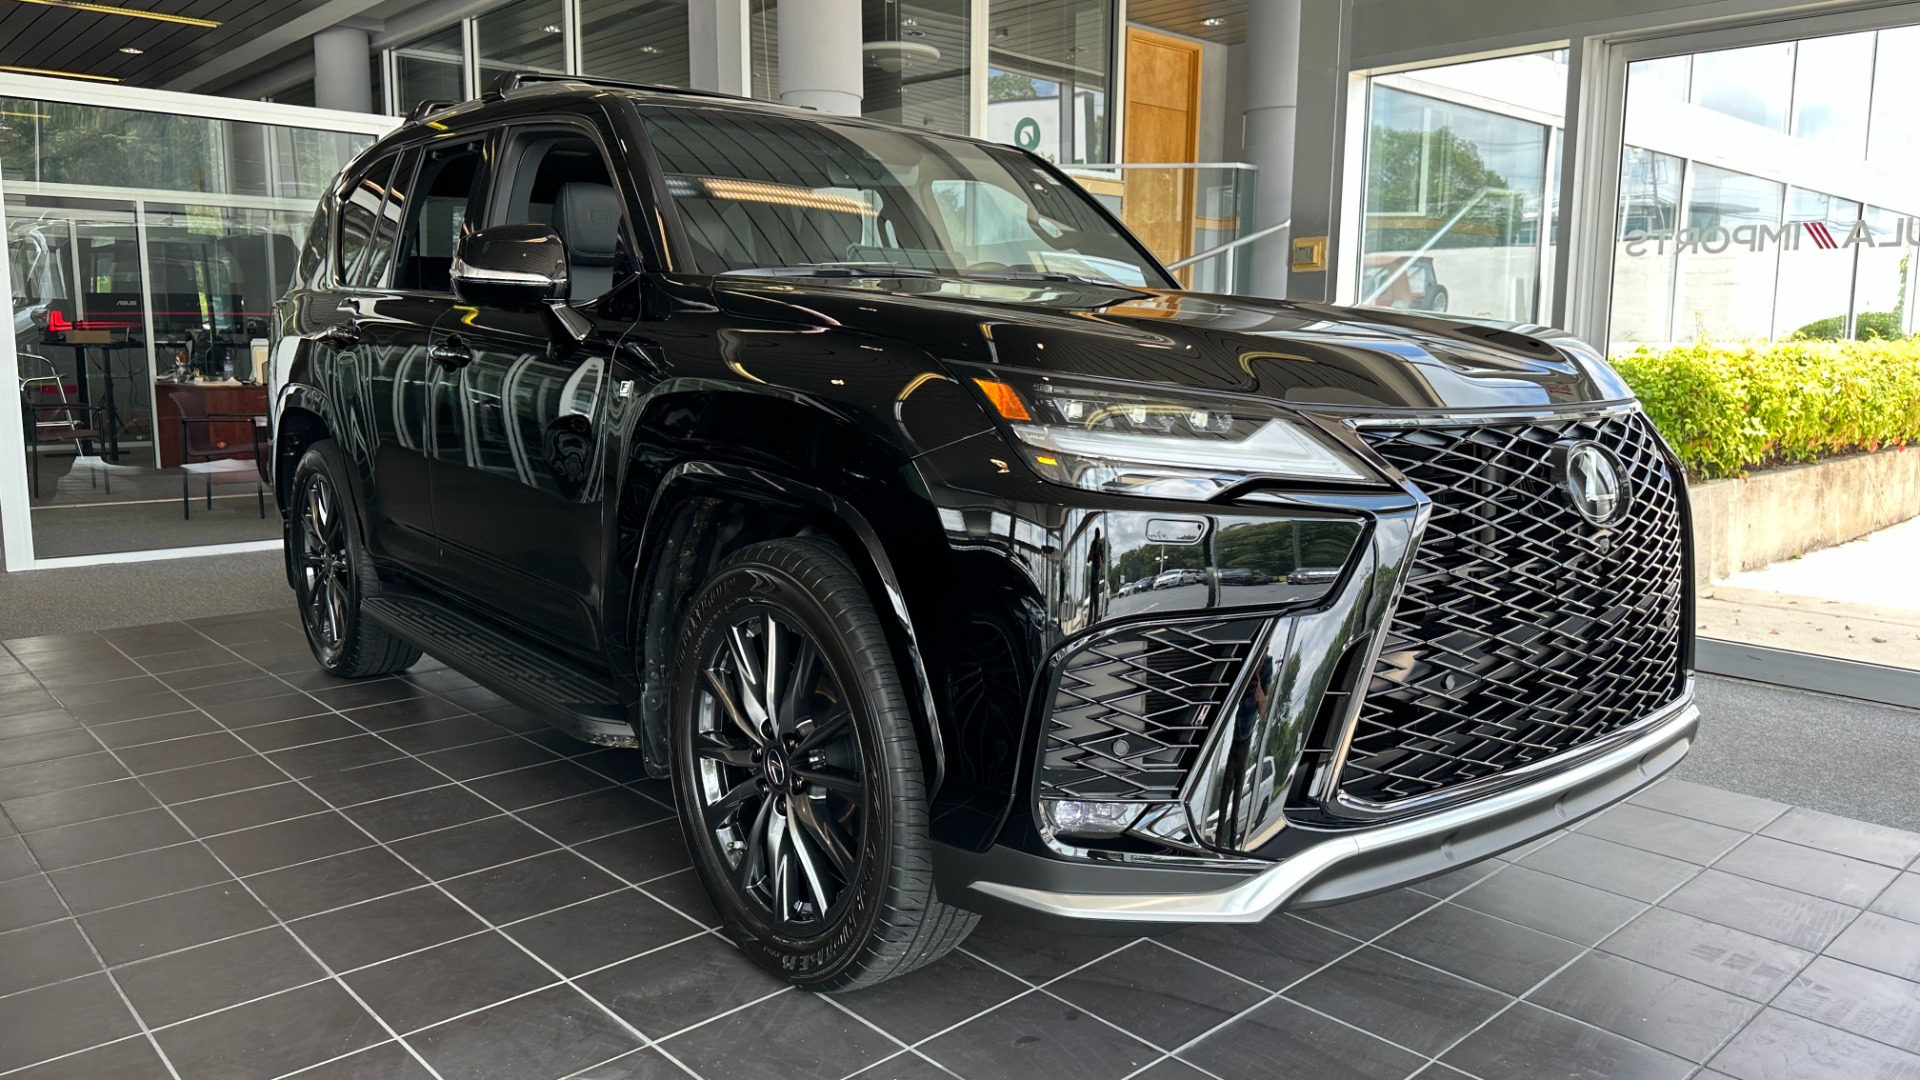 Used 2023 Lexus LX LX 600 F SPORT / MARK LEVINSON / HEIGHT CONTROL / CROSS BARS for sale $138,499 at Formula Imports in Charlotte NC 28227 1